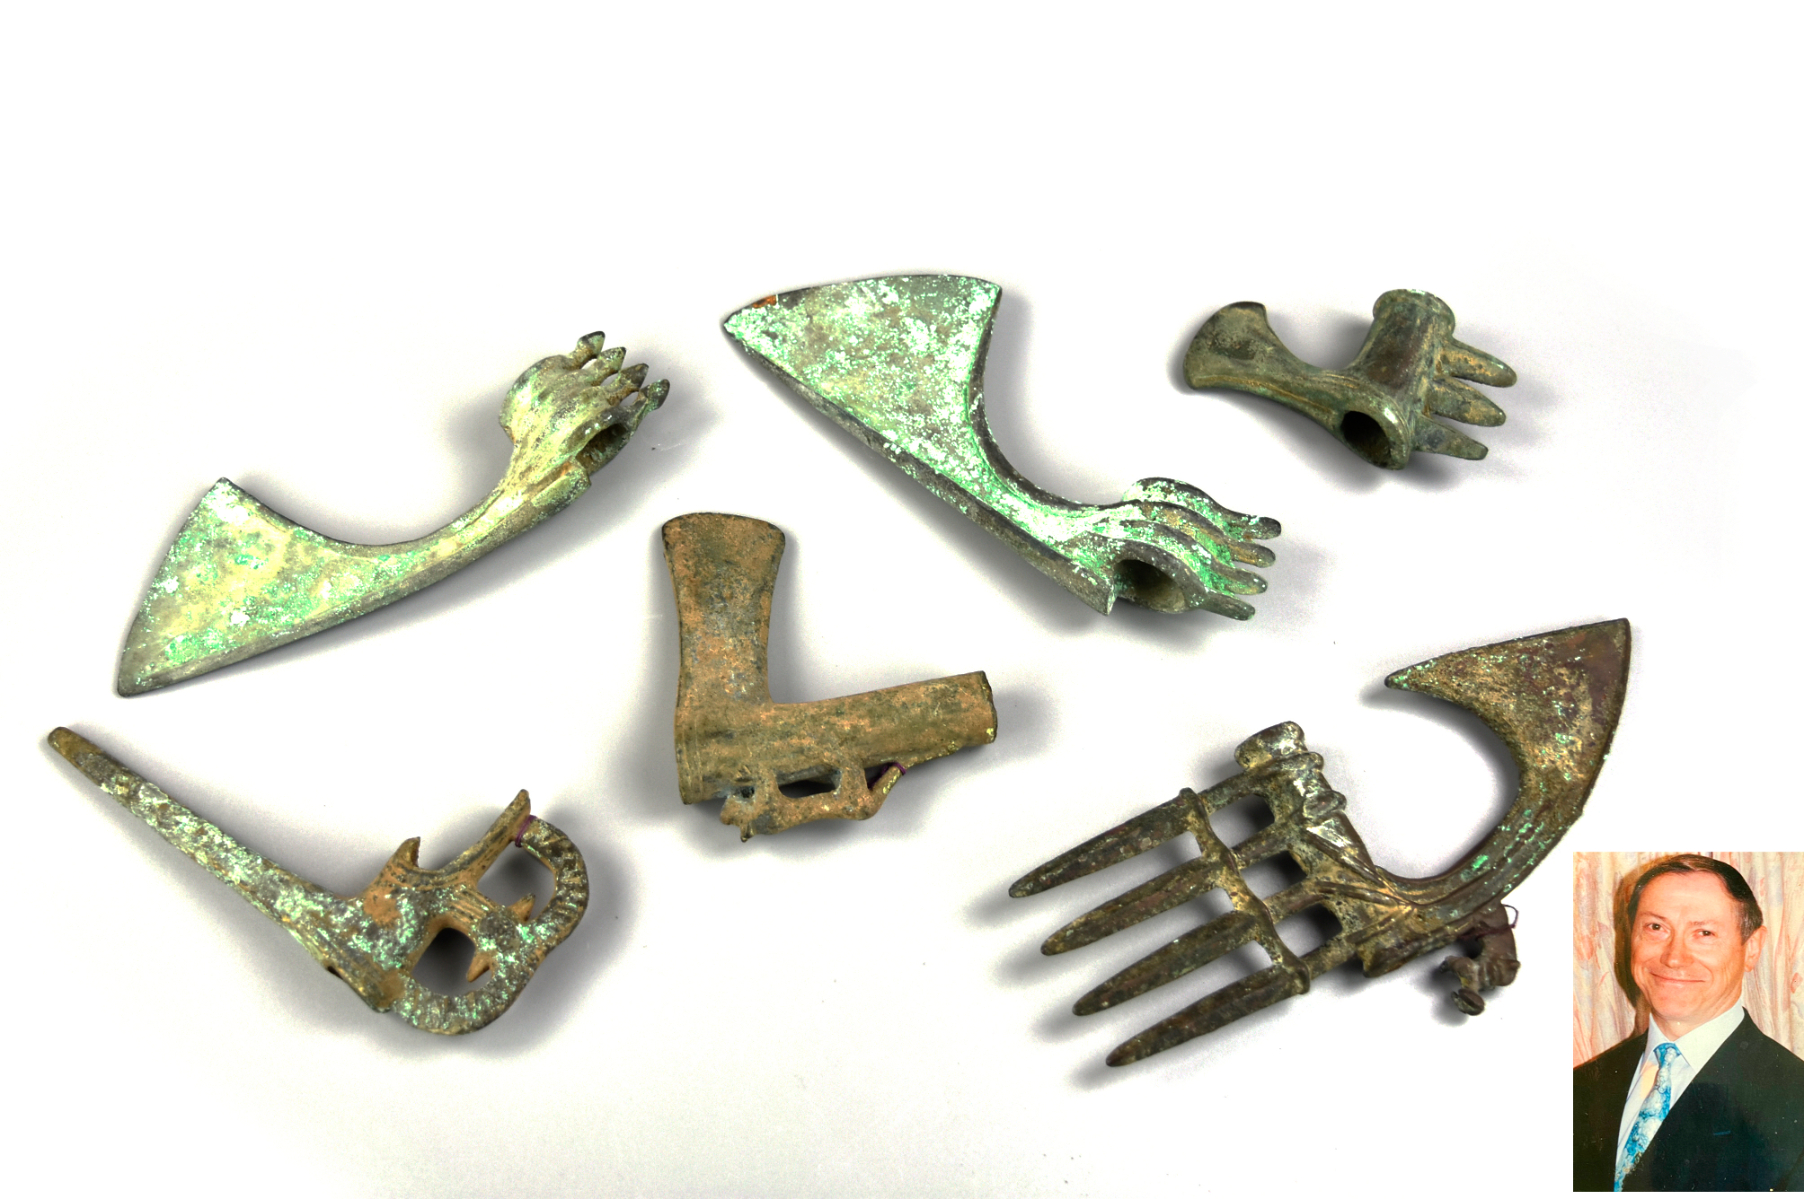 GROUP OF 6 CHINESE BRONZE WEAPON 3397c2